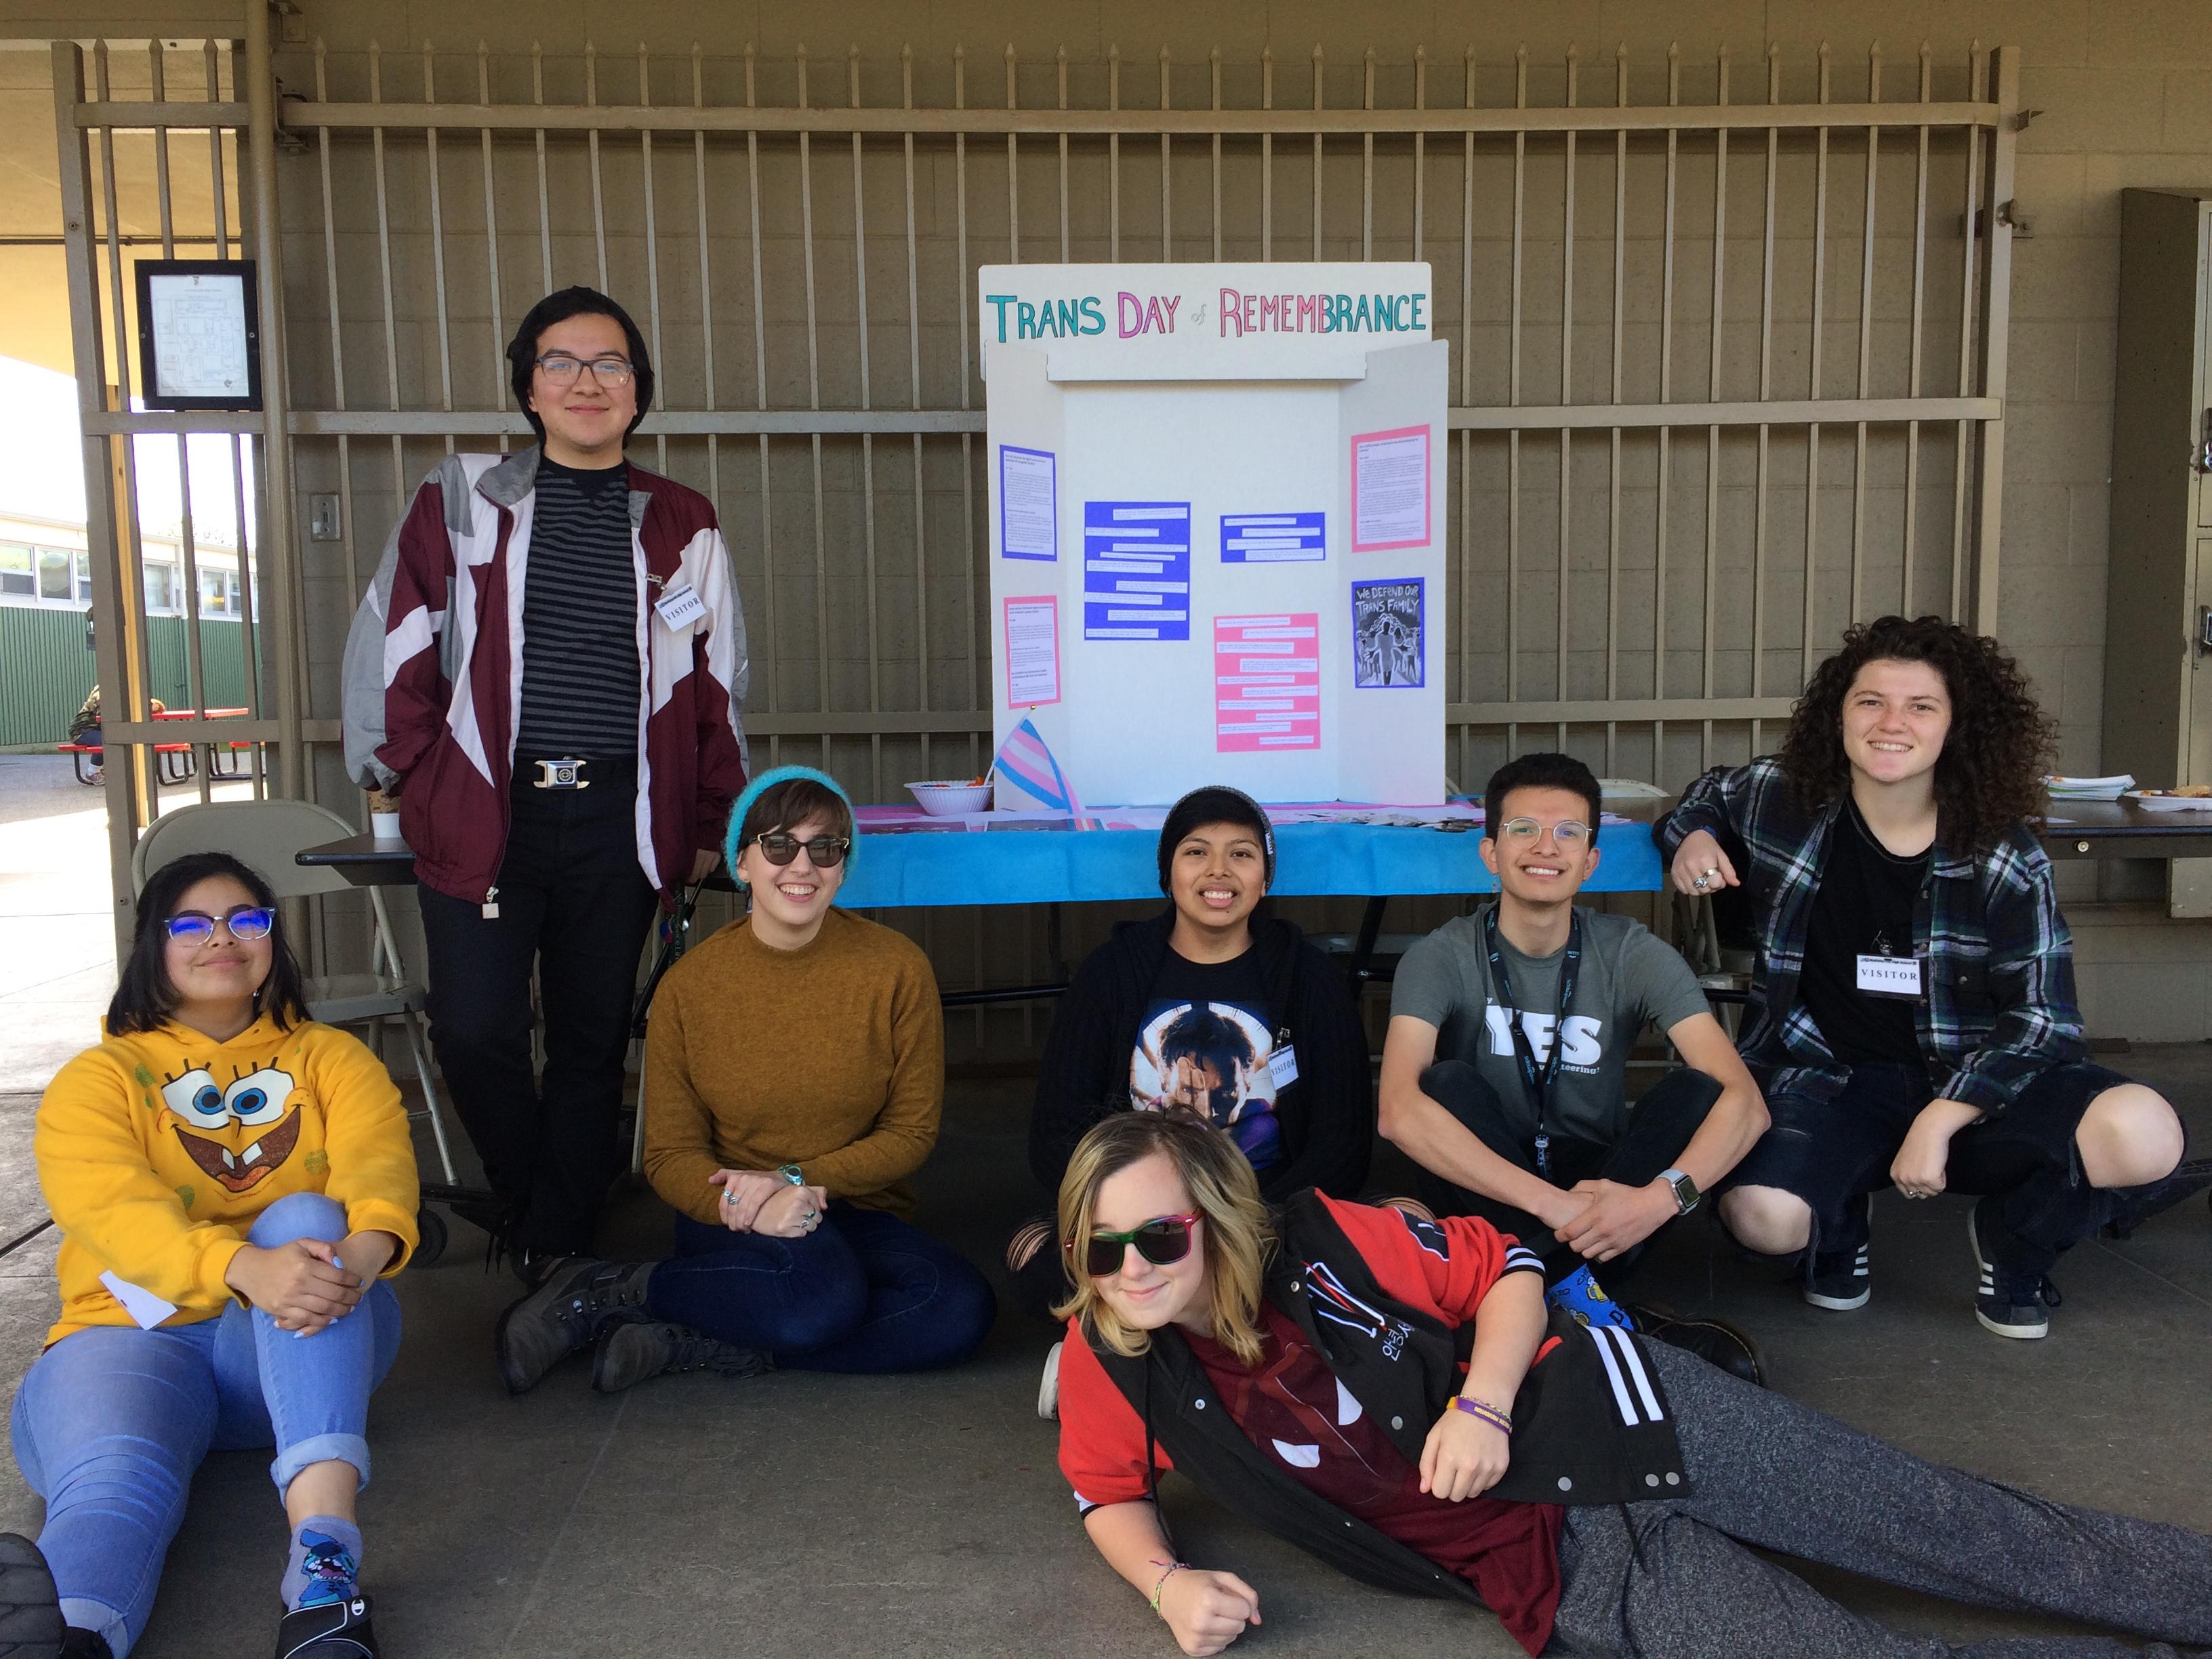 QMAP volunteer team host Trans Day of Remembrance table at McKinleyville High School